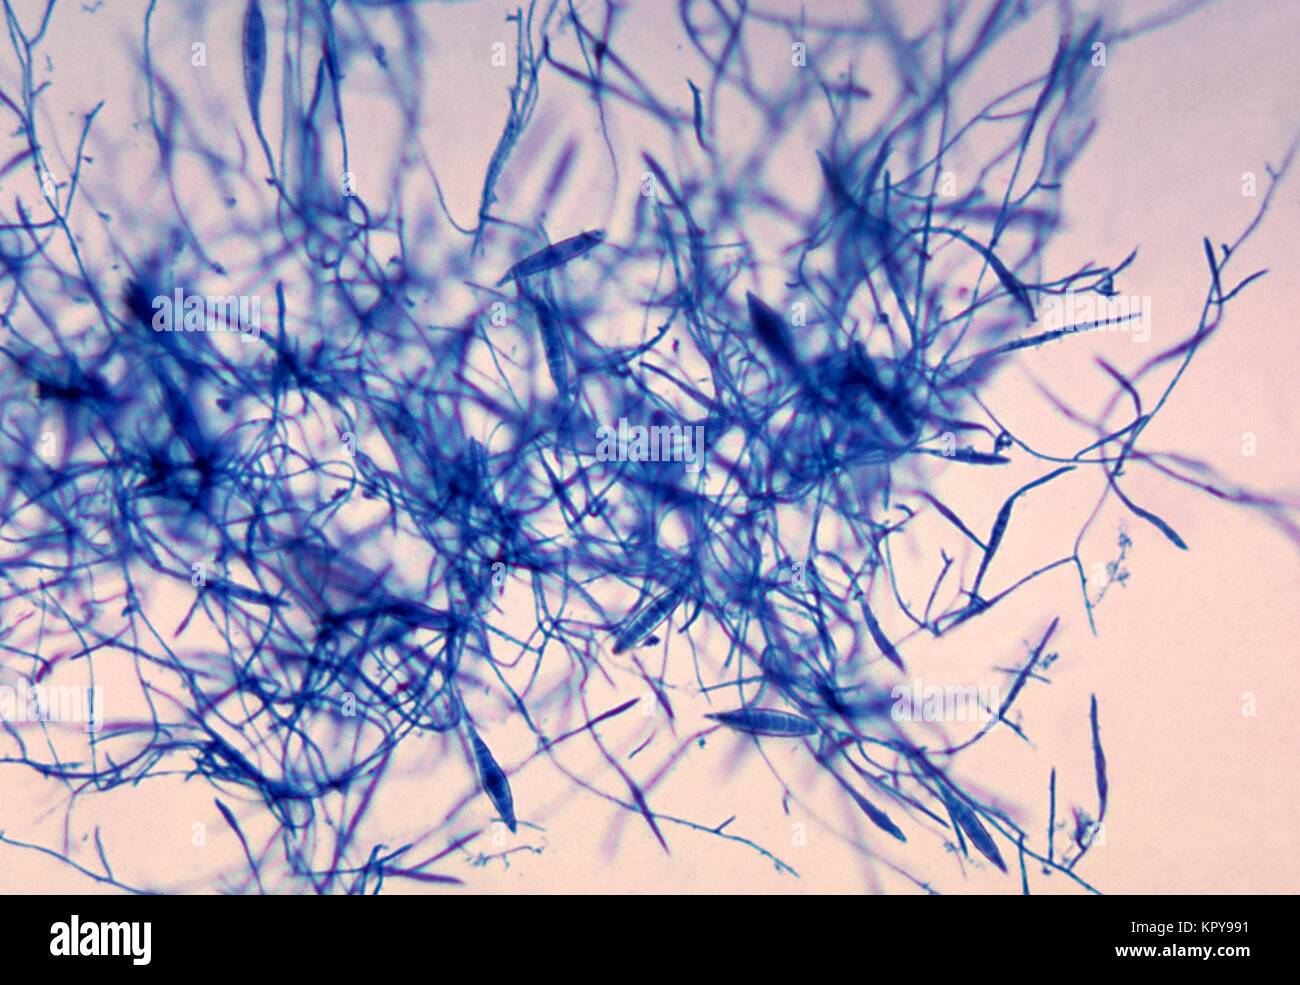 This is a photomicrograph of the fungus Microsporum canis using the lactophenol cotton blue staining technique. M. canis, a zoophilic dermatophyte often found in cats and dogs, is a common cause of tinea corporis and tinea capitis in humans, 1969. Other dermatophytes are included in the genera Epidermophyton and Trichophyton . Image courtesy CDC/Dr. Leanor Haley. Stock Photo